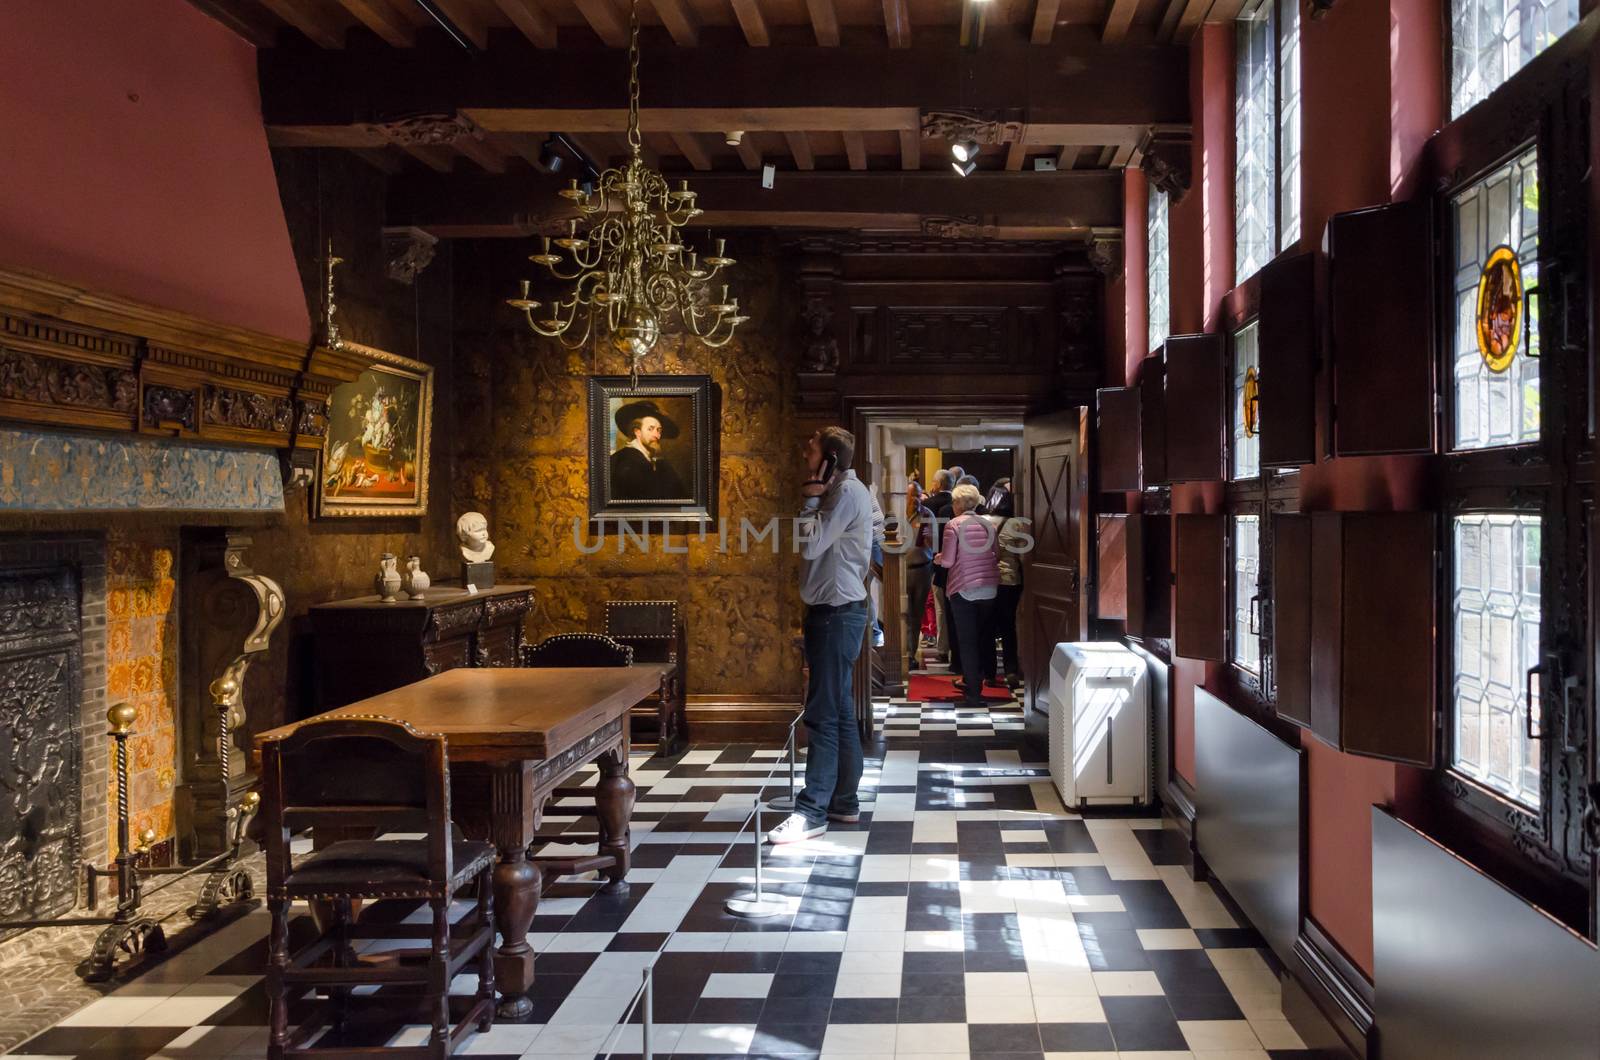 Antwerp, Belgium - May 10, 2015: Tourist visit Rubenshuis (Rubens House) on May 10, 2015. Rubens House is the former home and studio of Peter Paul Rubens (1577–1640) in Antwerp. It is now a museum.